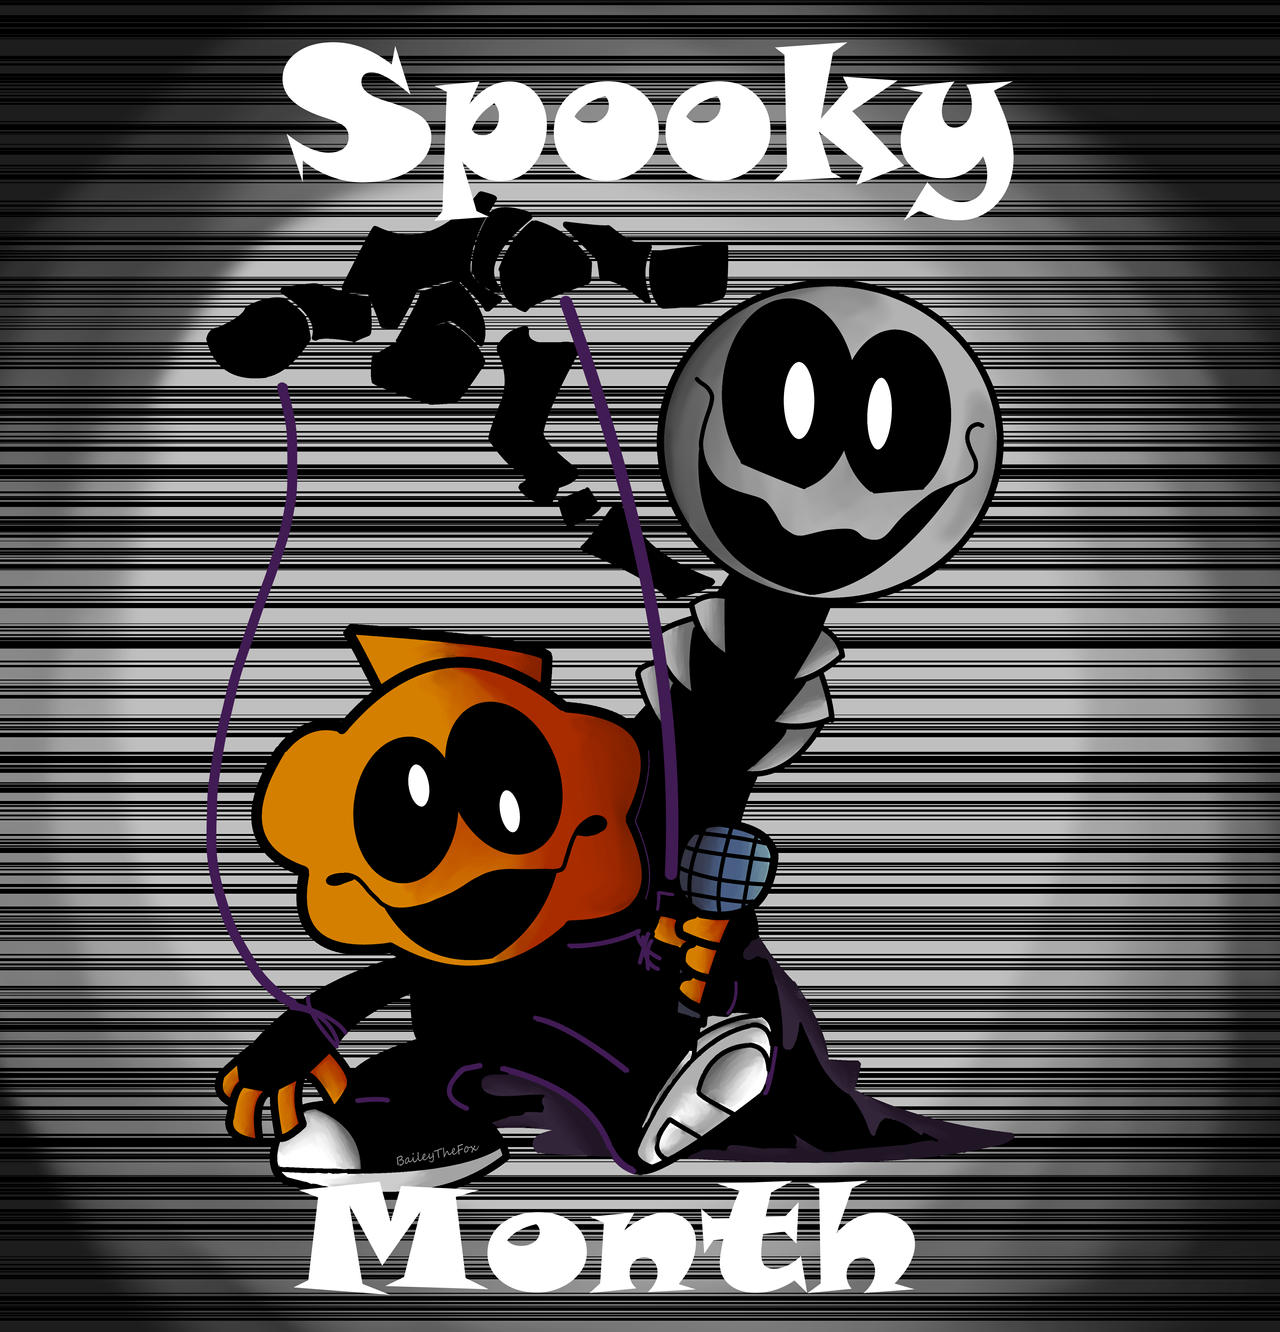 some Spooky month images idk *not mine* credits to the owners of